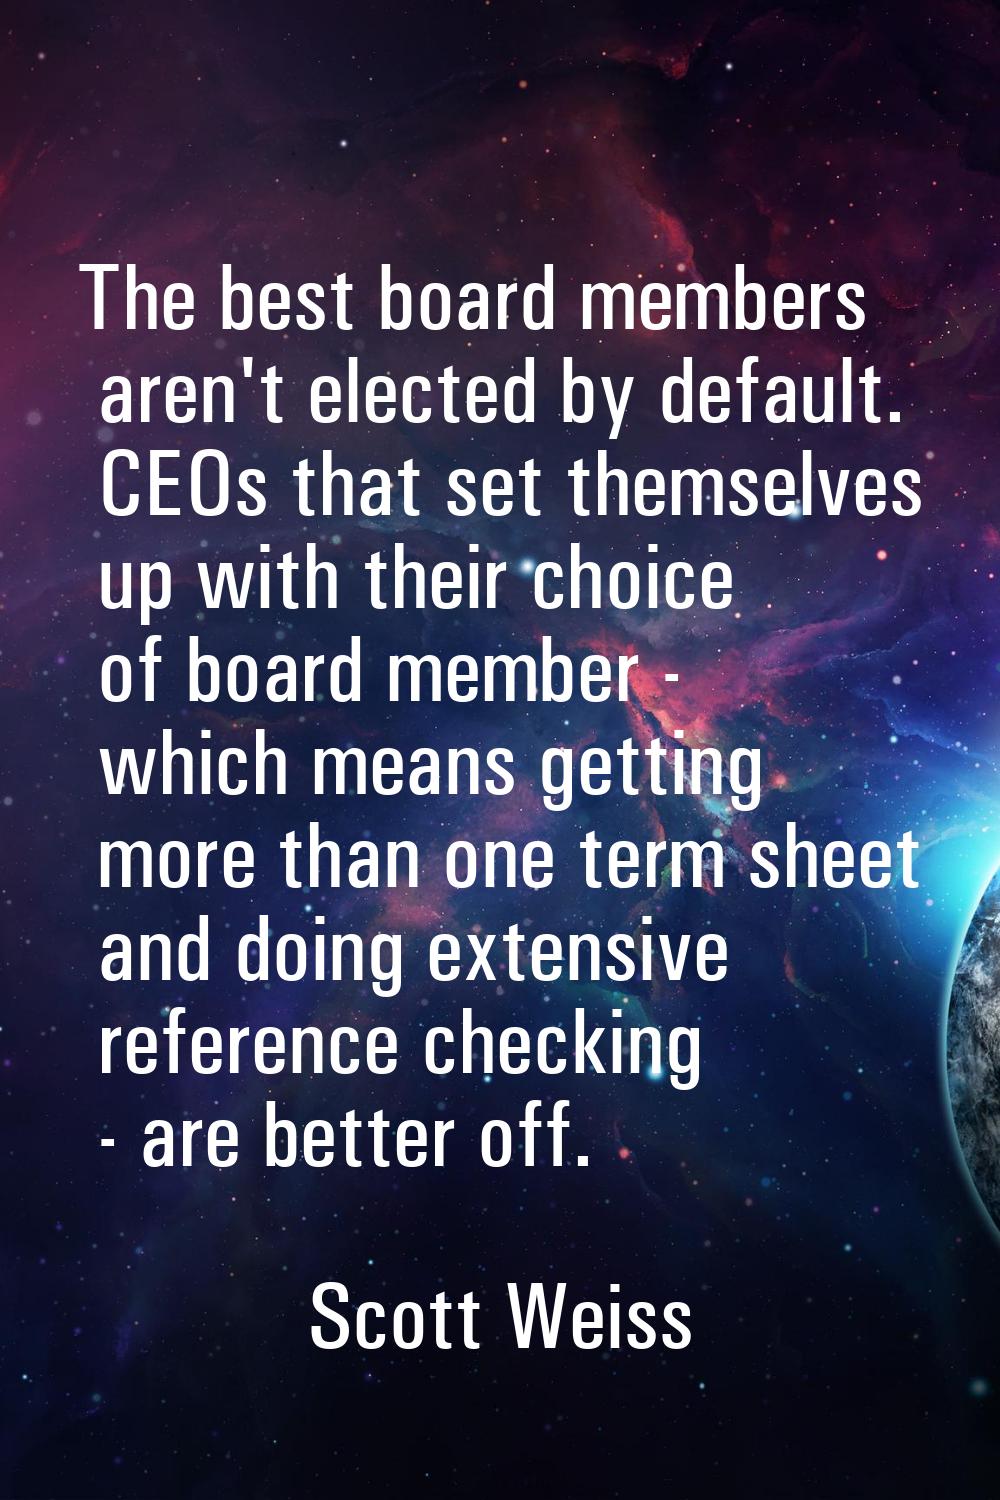 The best board members aren't elected by default. CEOs that set themselves up with their choice of 